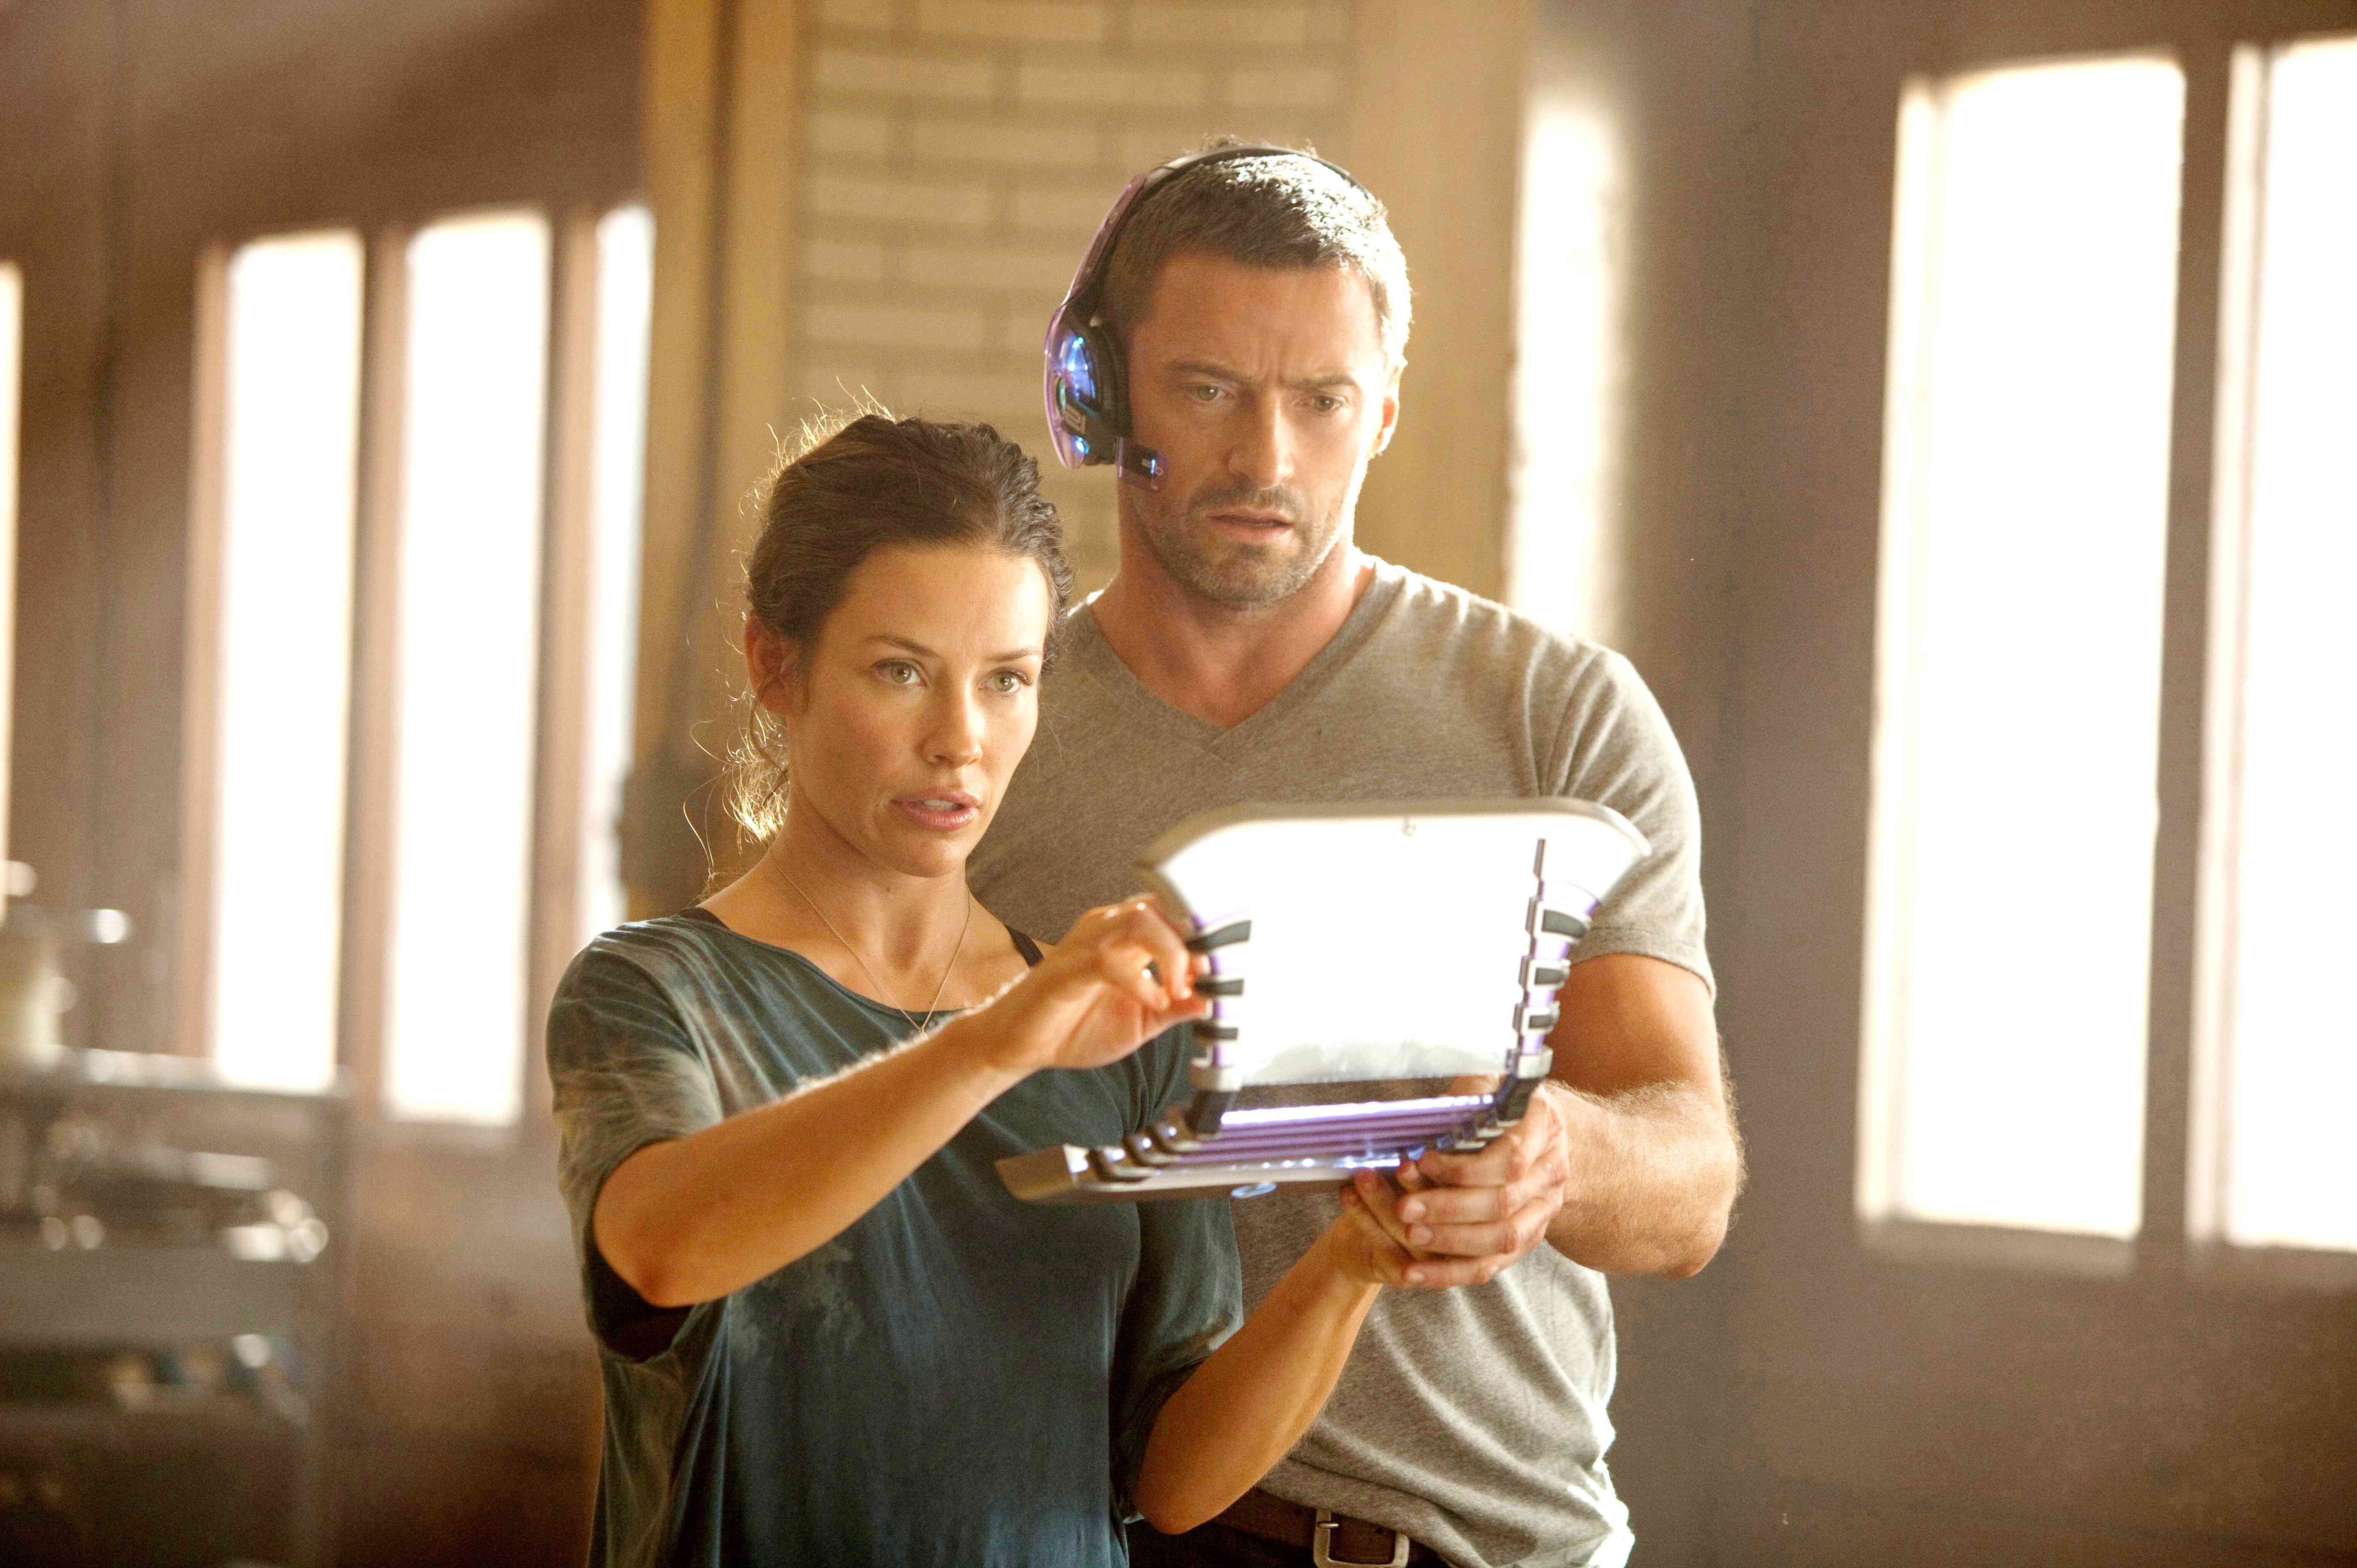 Evangeline Lilly stars as Bailey Tallet and Hugh Jackman stars as Charlie Kenton in Walt Disney Pictures' Real Steel (2011)